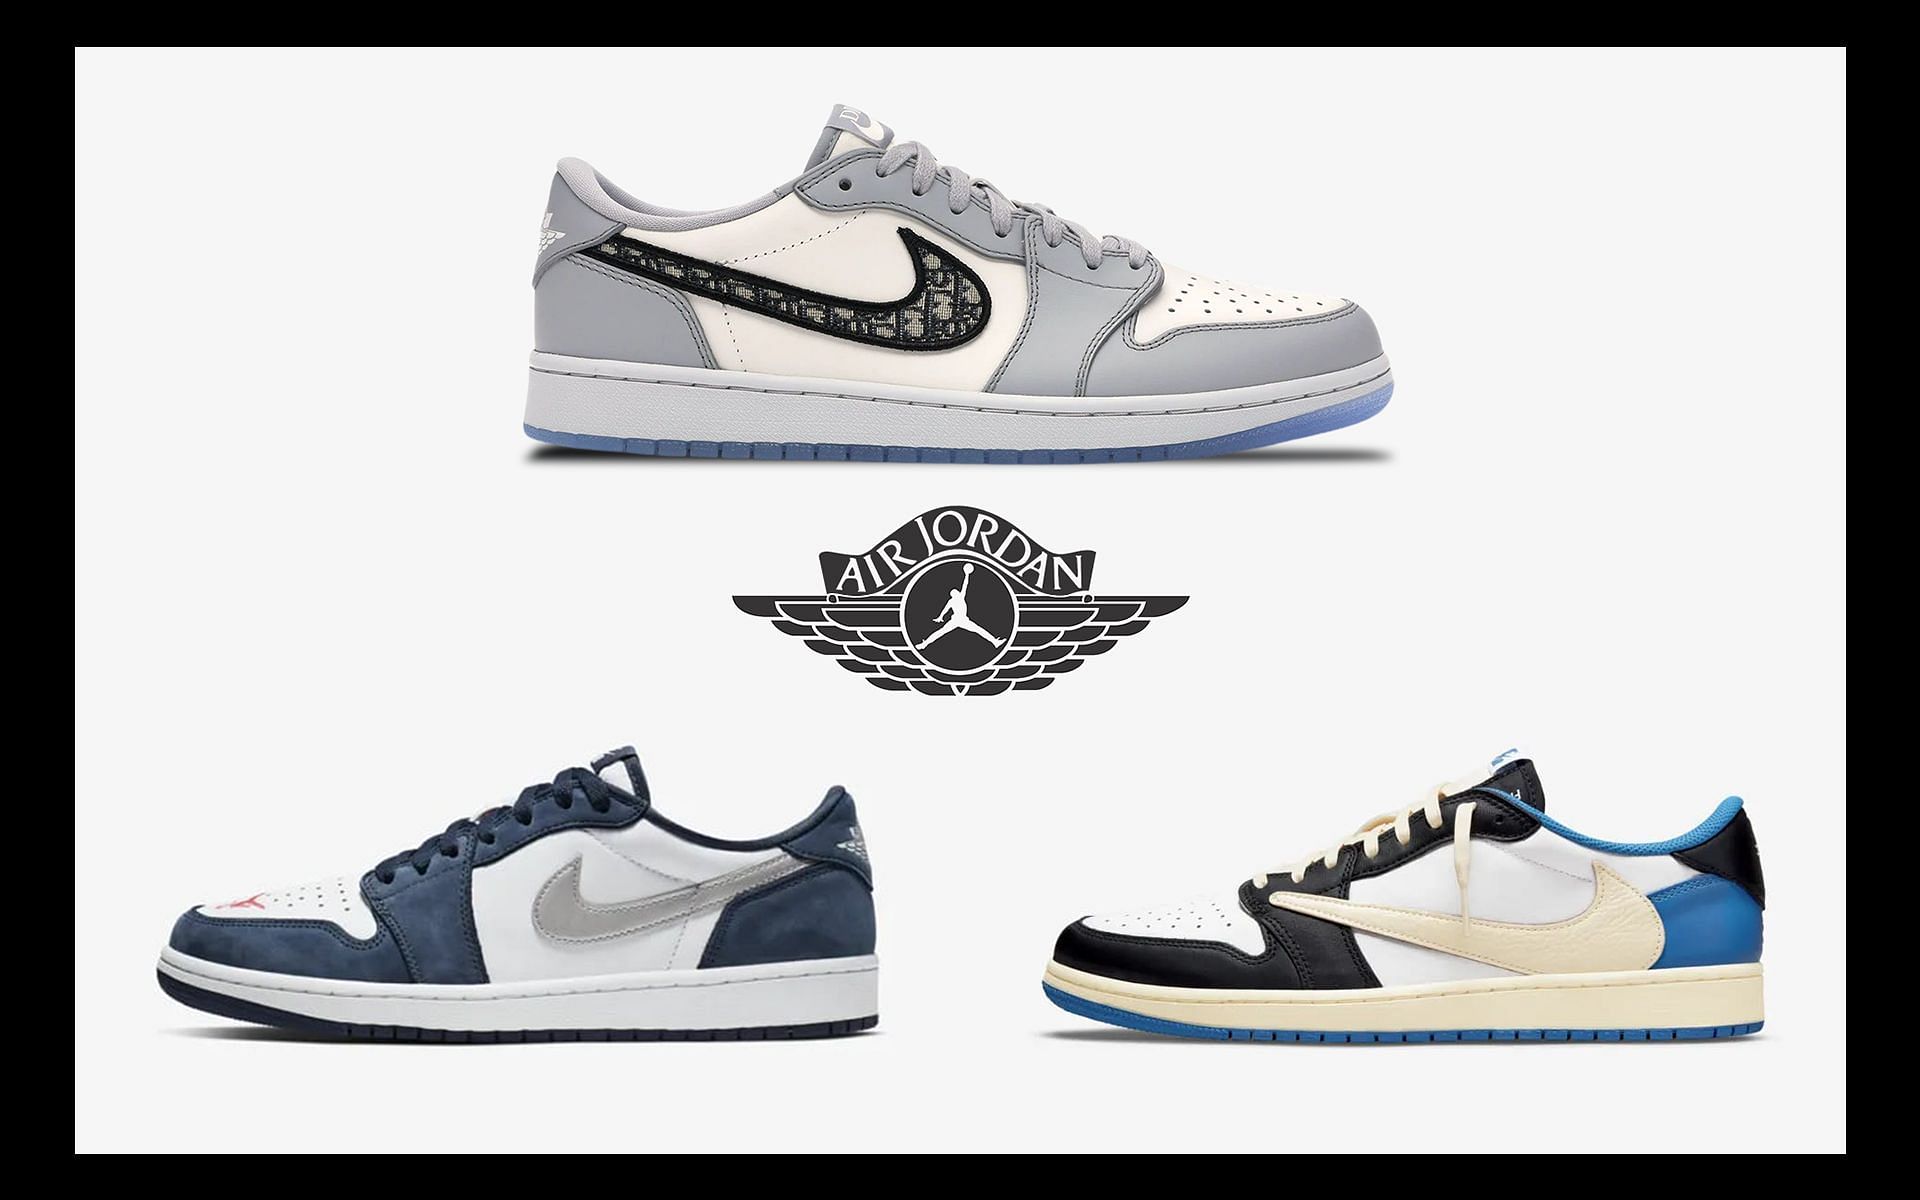 3 best Nike Air Jordan 1 Low collaborations of all time